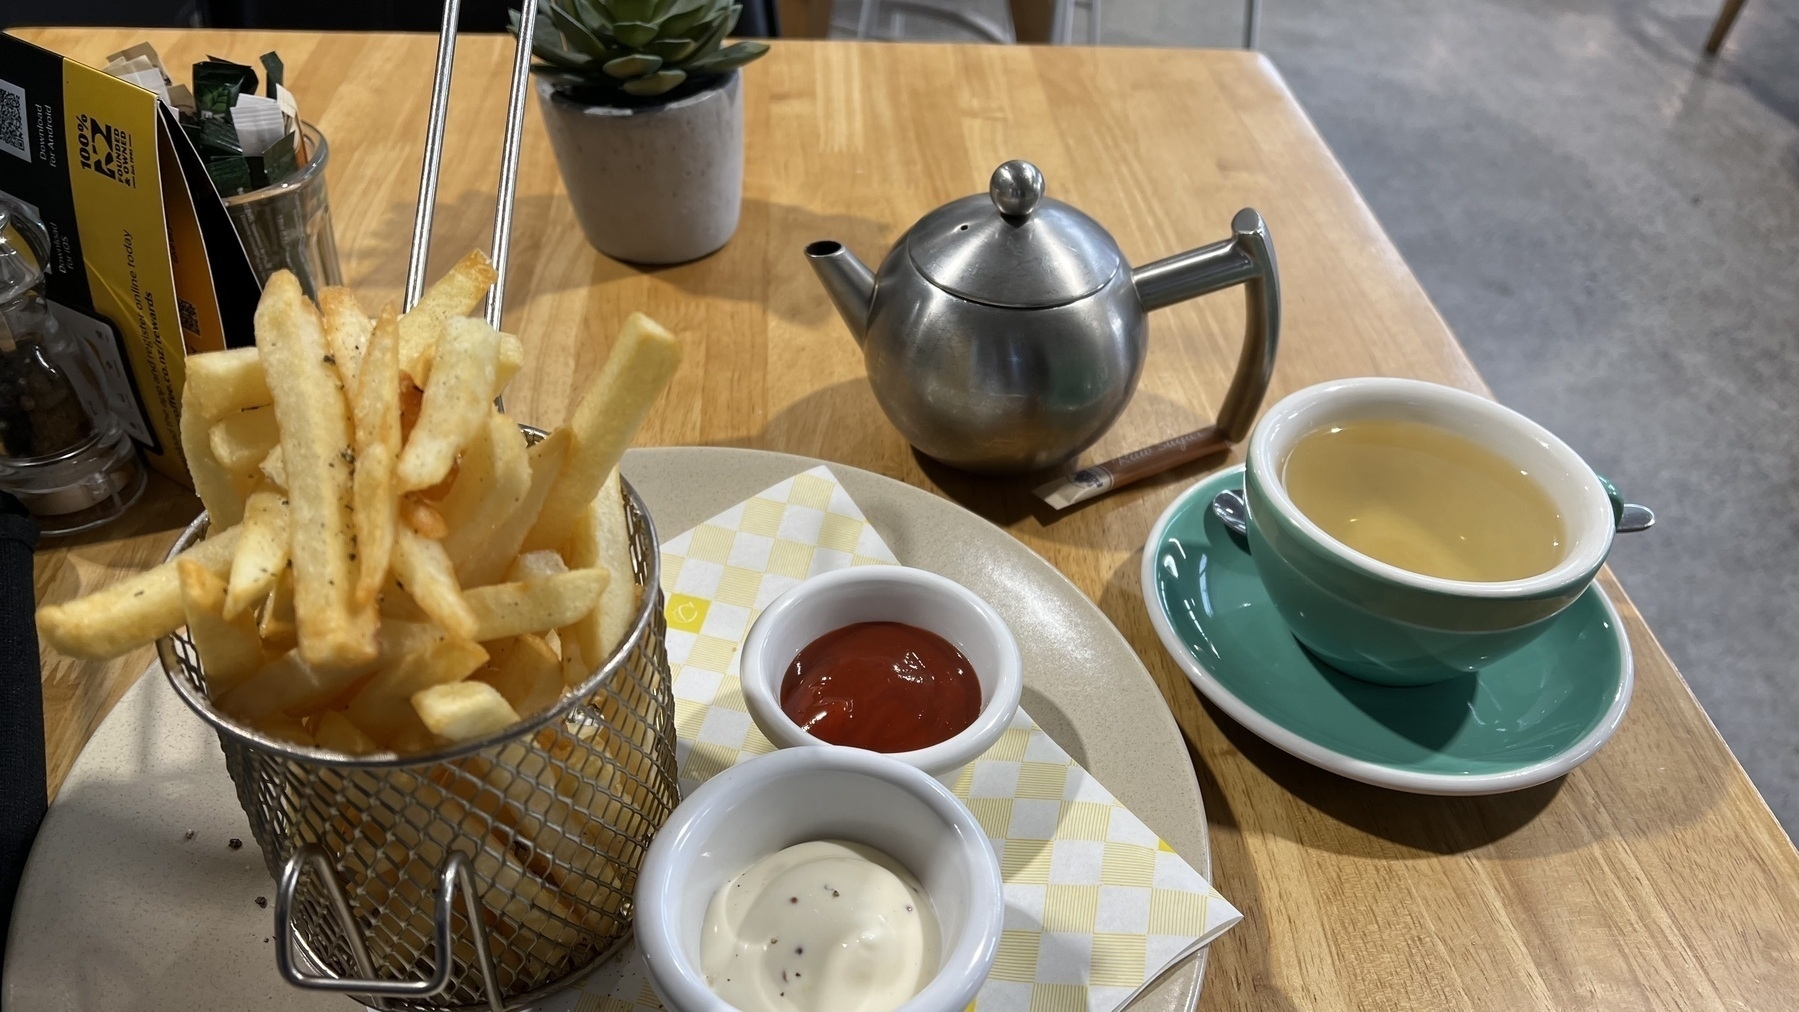 A serving of fries with ketchup and mayonnaise, a small tea pot, a cup of tea, and a potted plant are arranged on a wooden table.